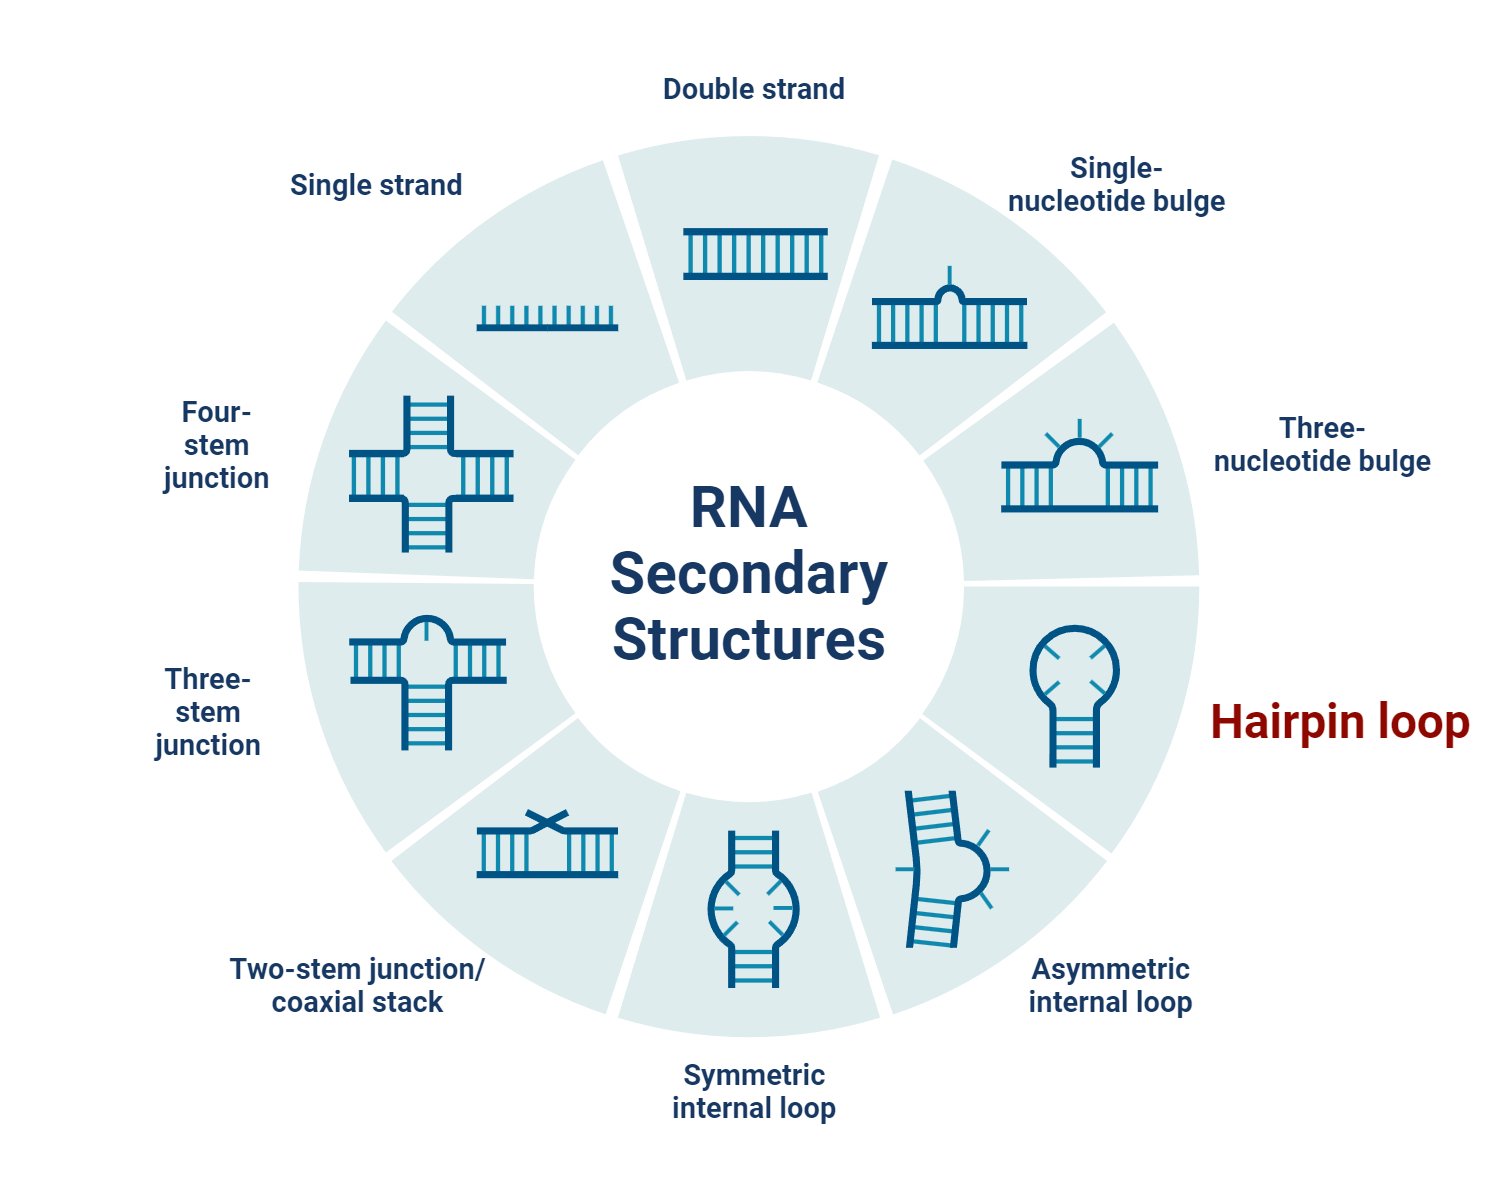 RNA Secondary Structures- Hairpin loop